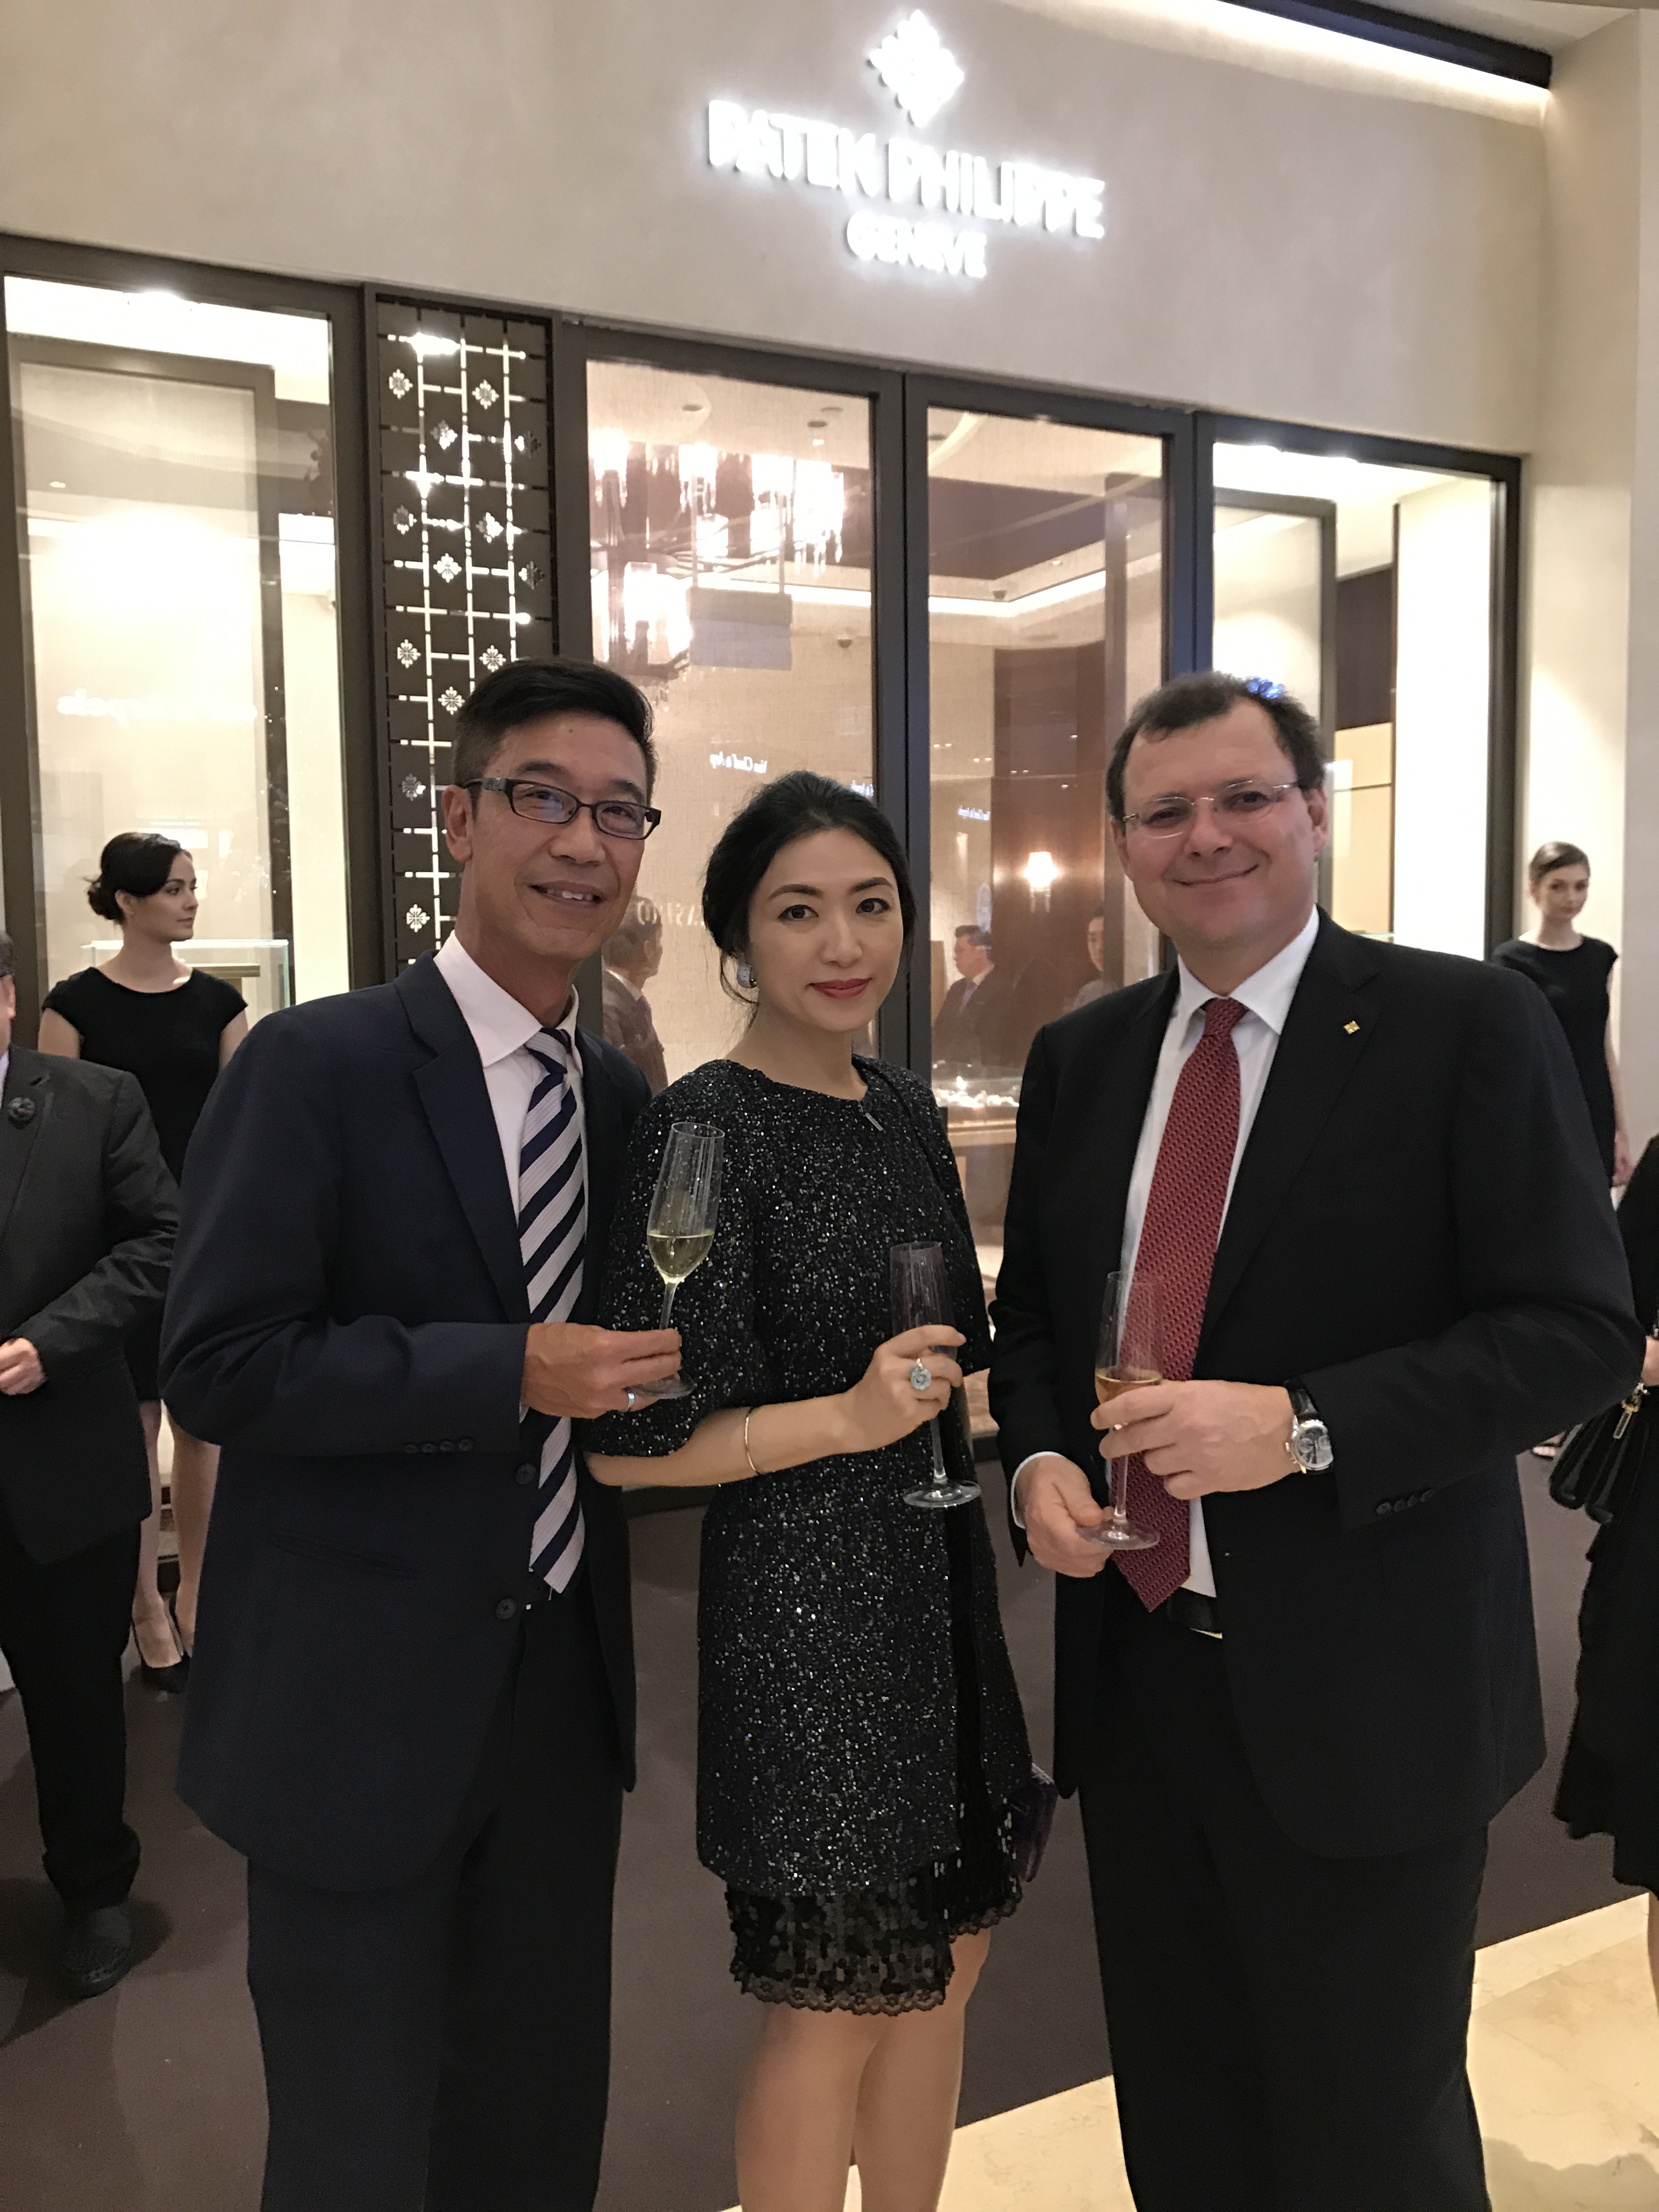 At the re-opening of the Marina Bay Sands Patek Philippe Boutique with Patek Philippe President Thierry Stern (right)